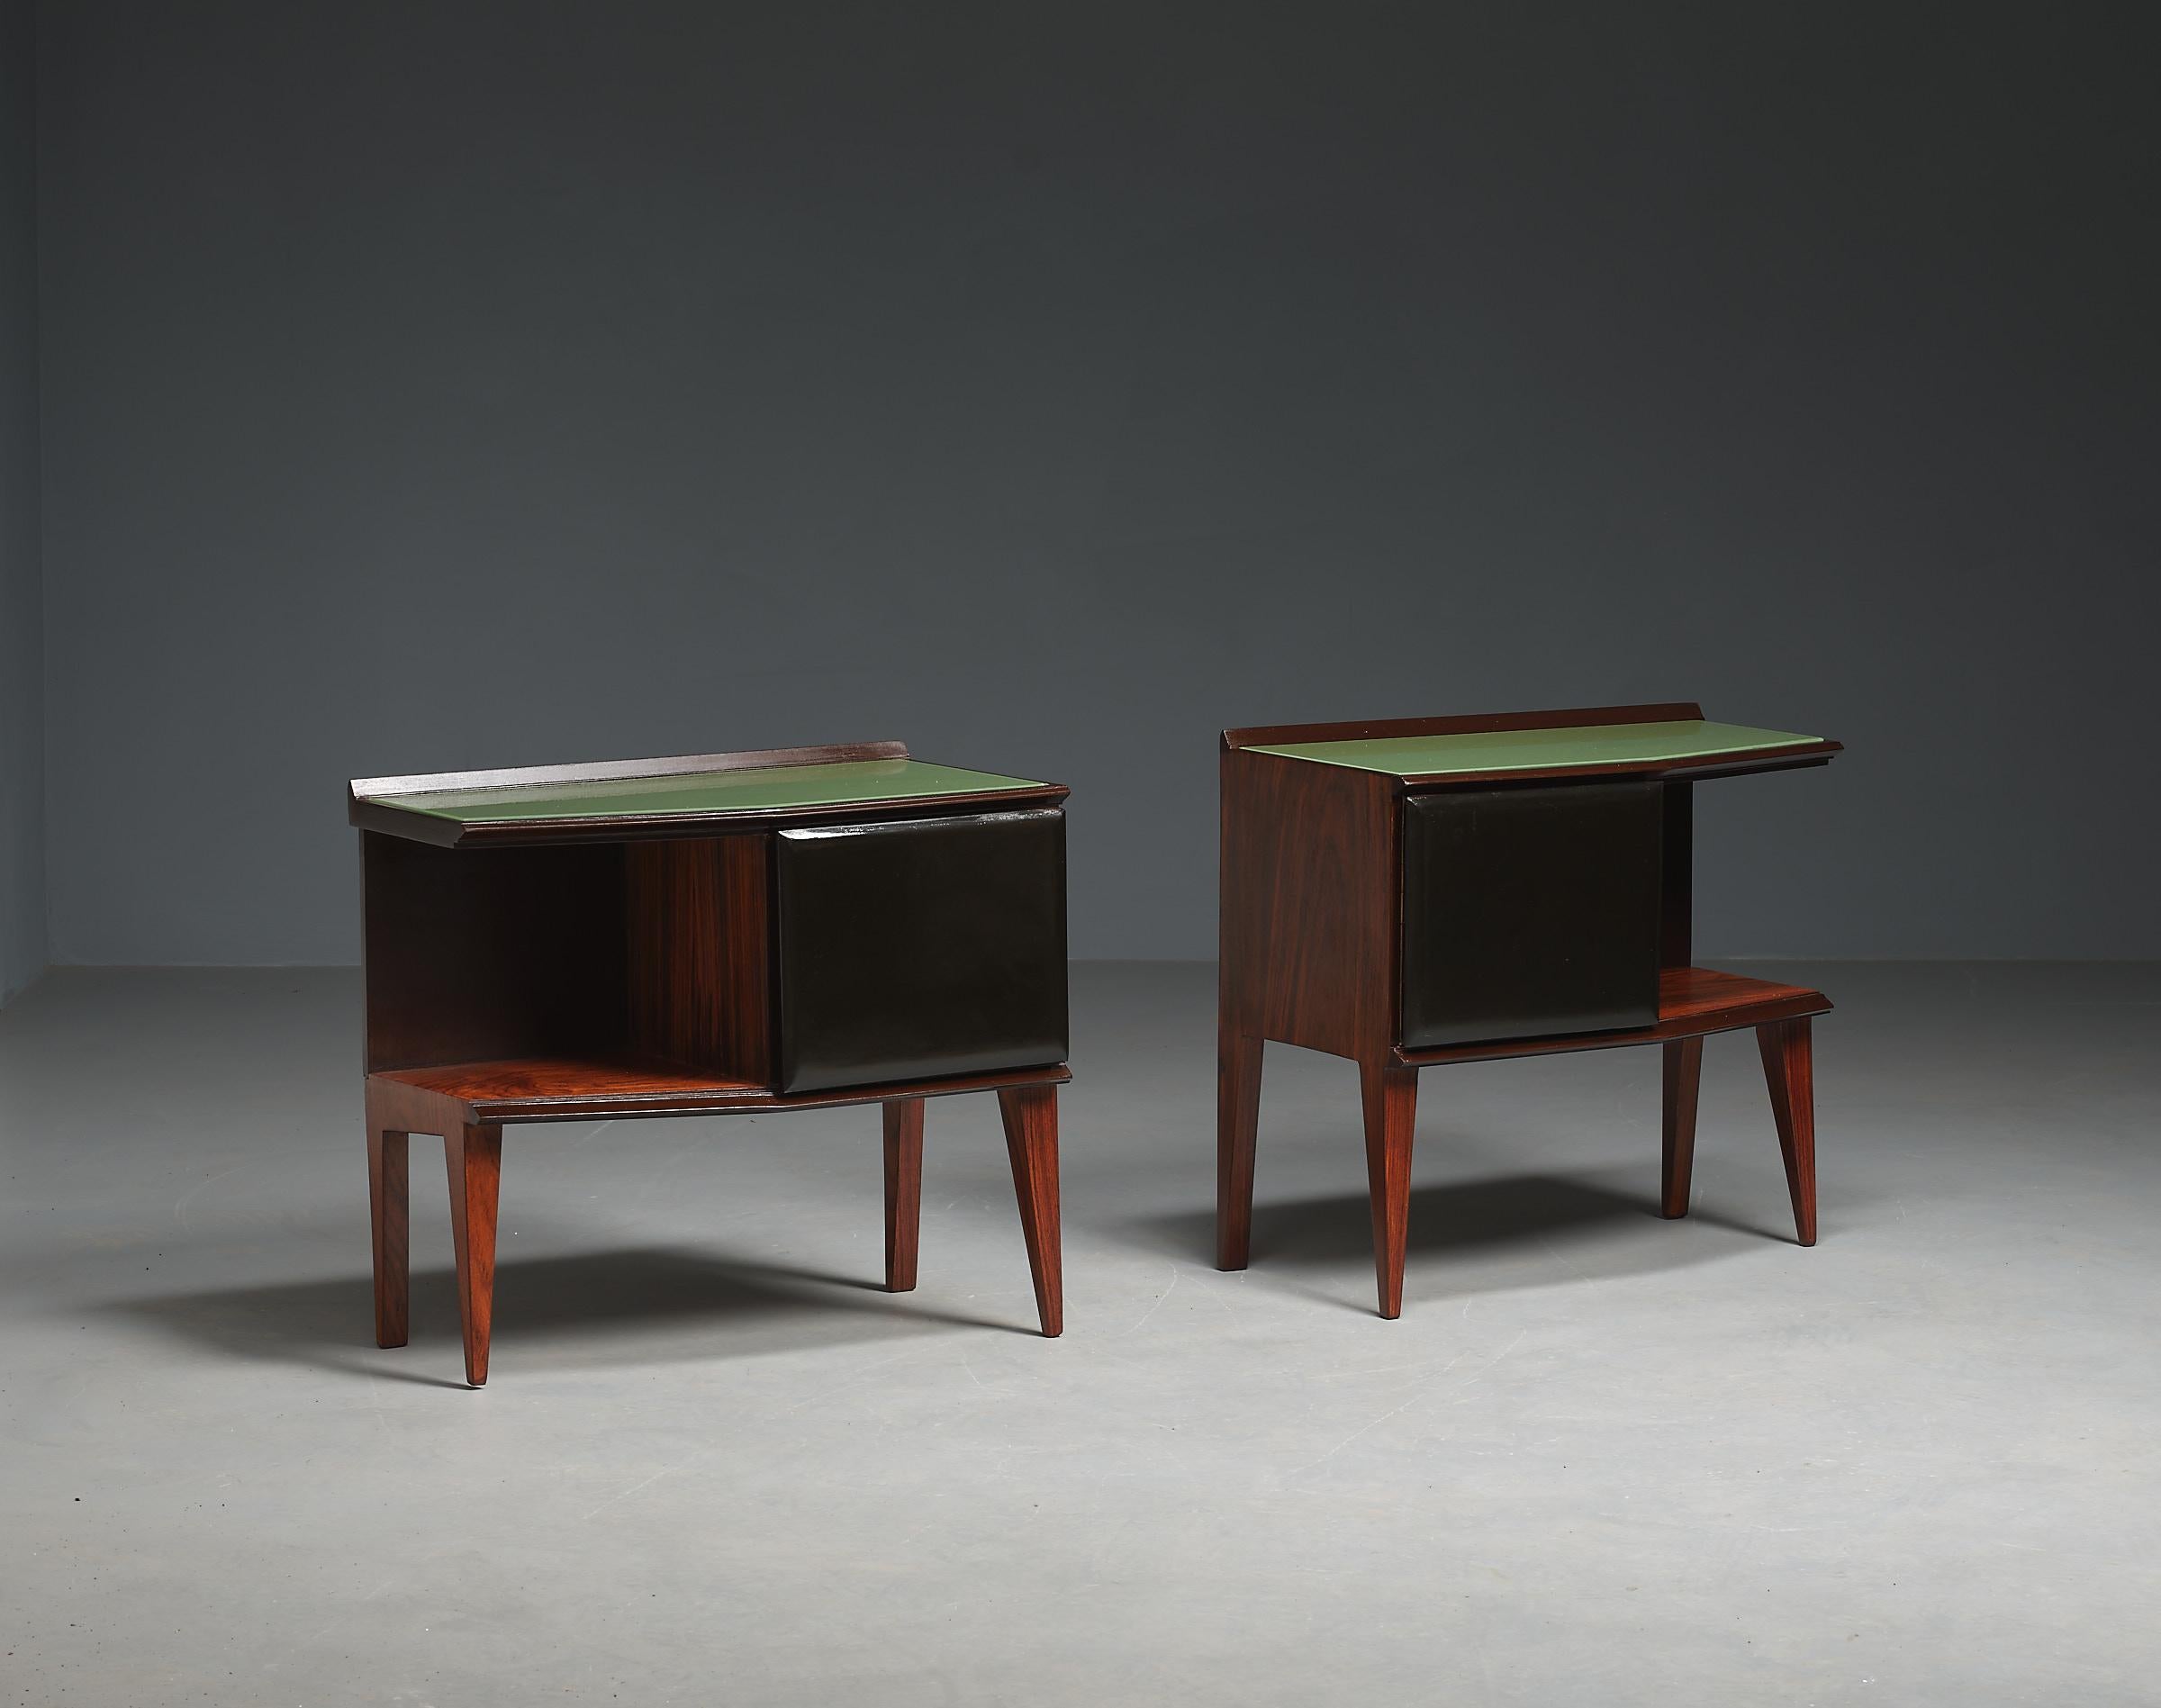 Discover a pair of authentic Italian 1950s bedside tables, showcasing the pinnacle of Italian craftsmanship. These remarkable pieces have been meticulously restored to their original glory, with a restyling by RETRO4M, while staying true to the